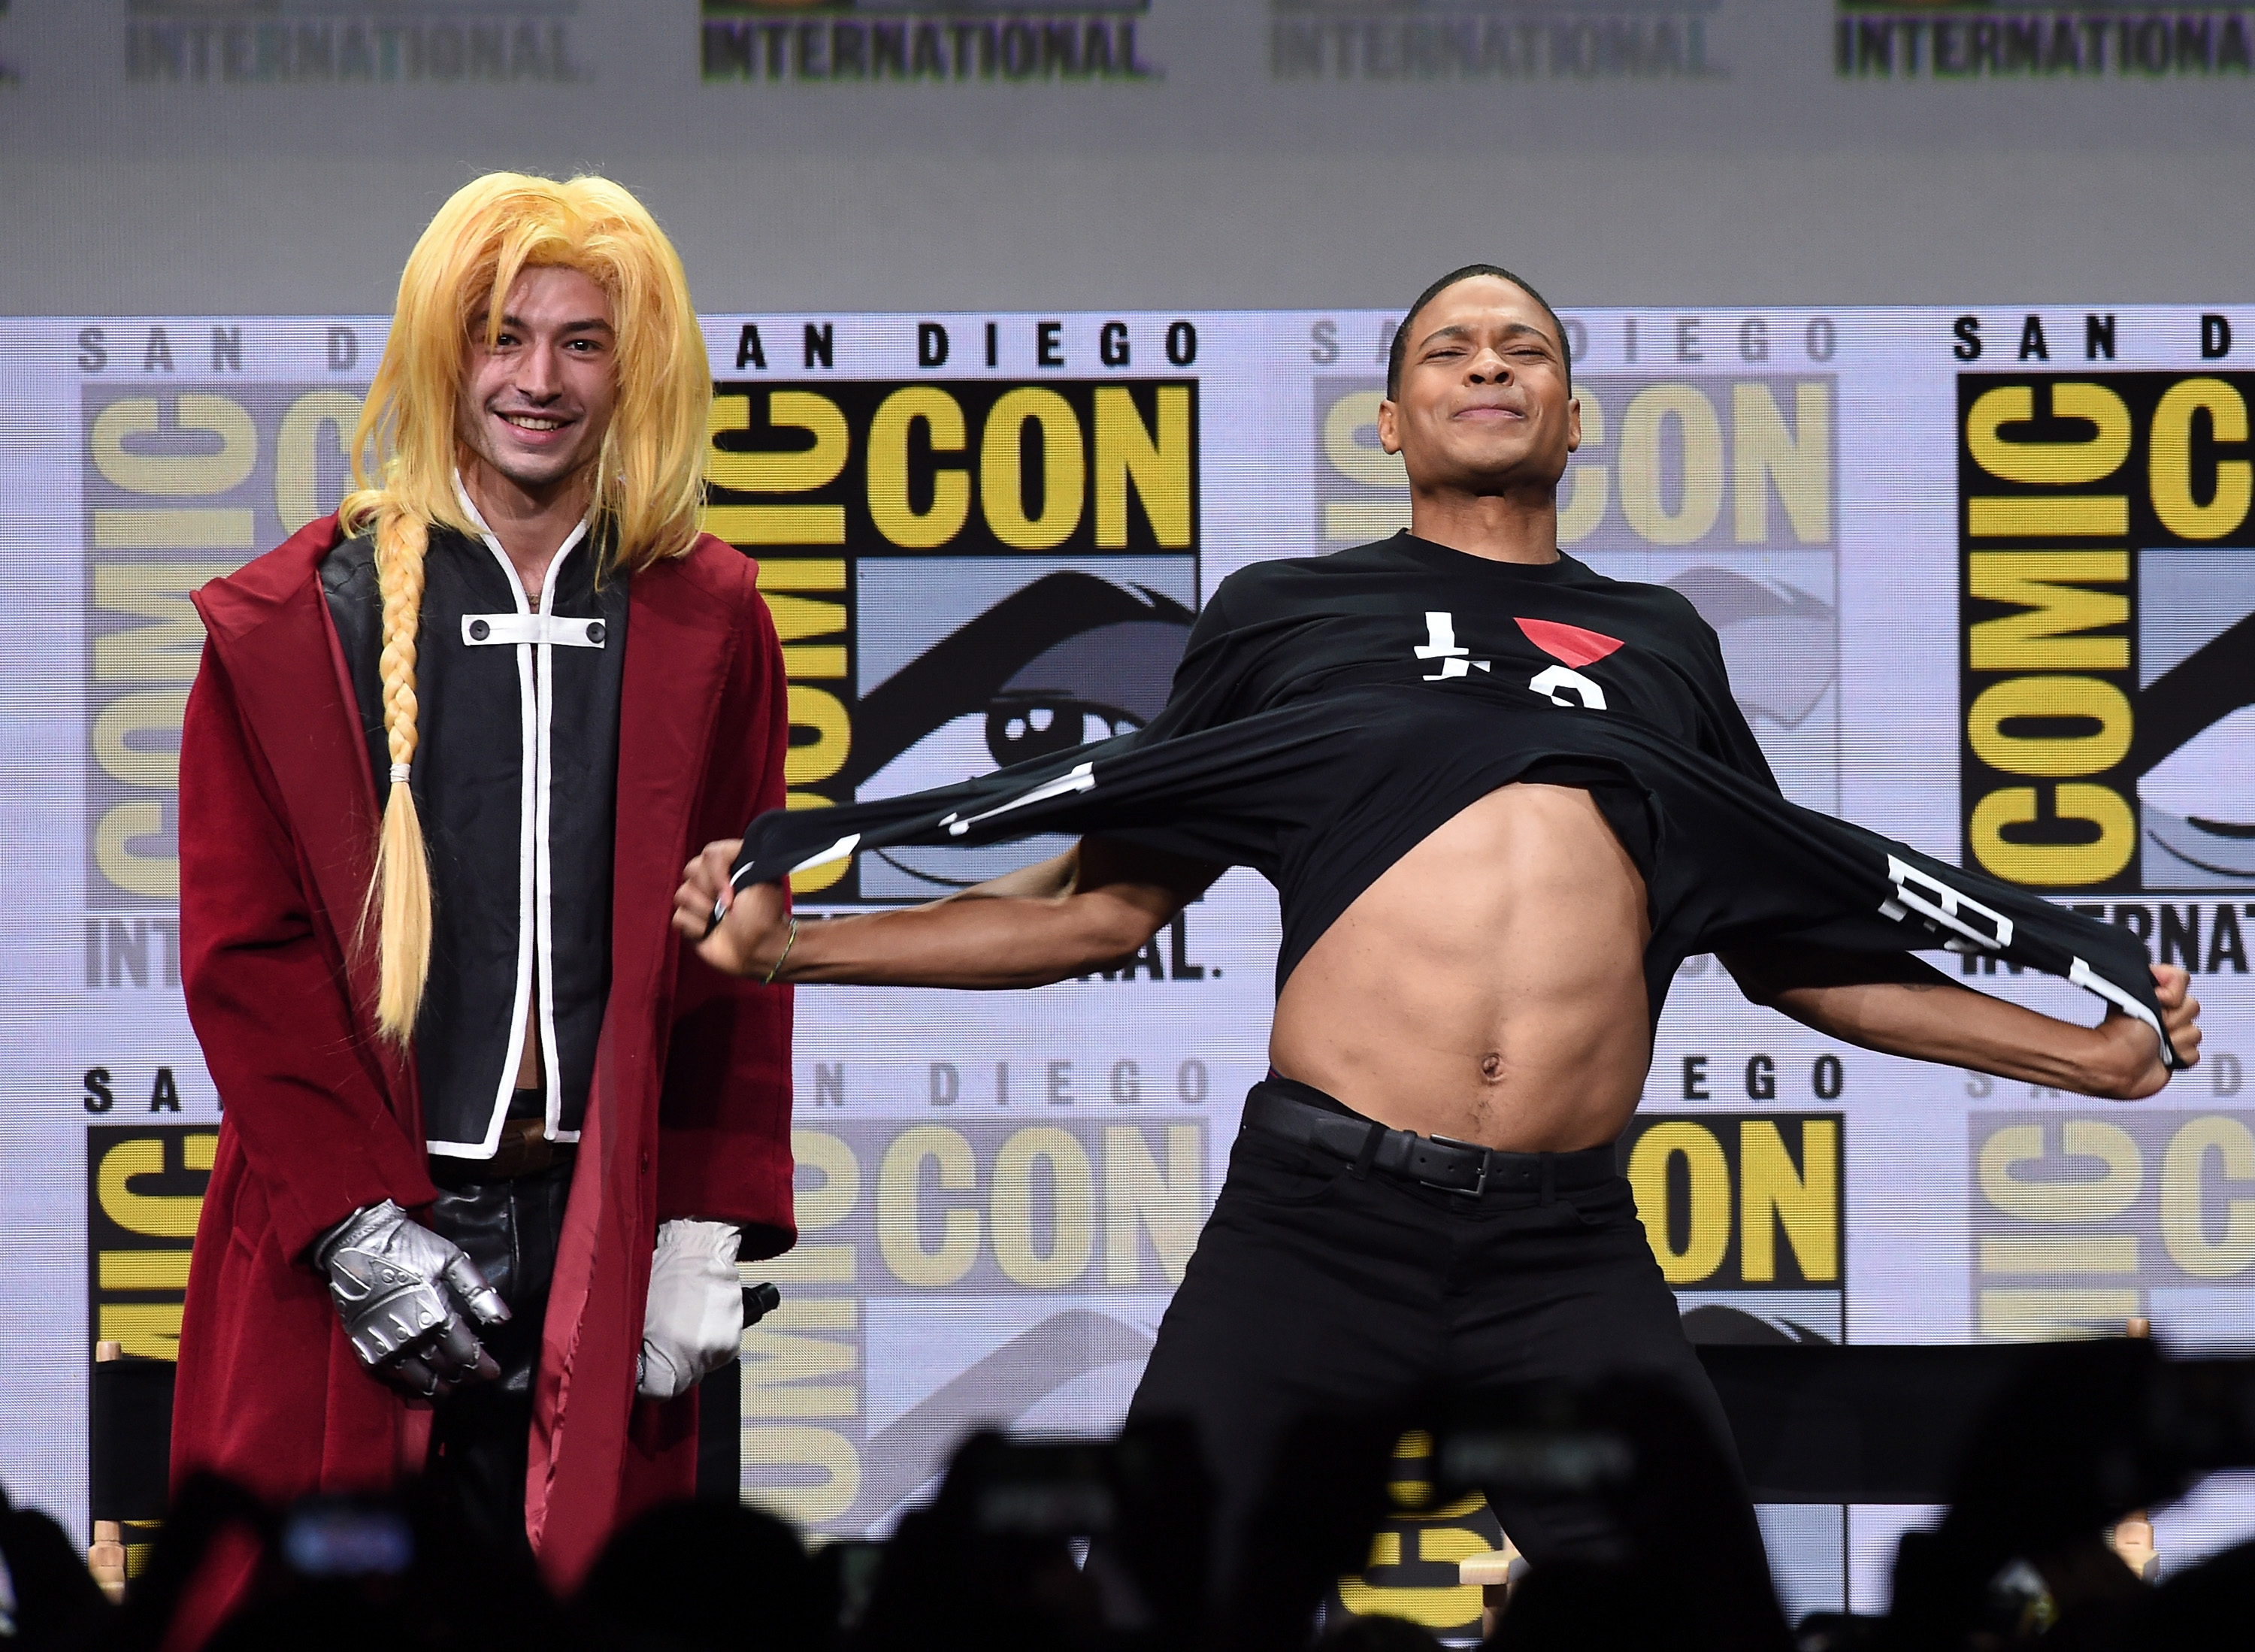 Actors Ezra Miller (L) and Ray Fisher attend the Warner Bros. Pictures "Justice League" Presentation during Comic-Con International 2017 at San Diego Convention Center on July 22, 2017 in San Diego, California (Kevin Winter&mdash;Getty Images)